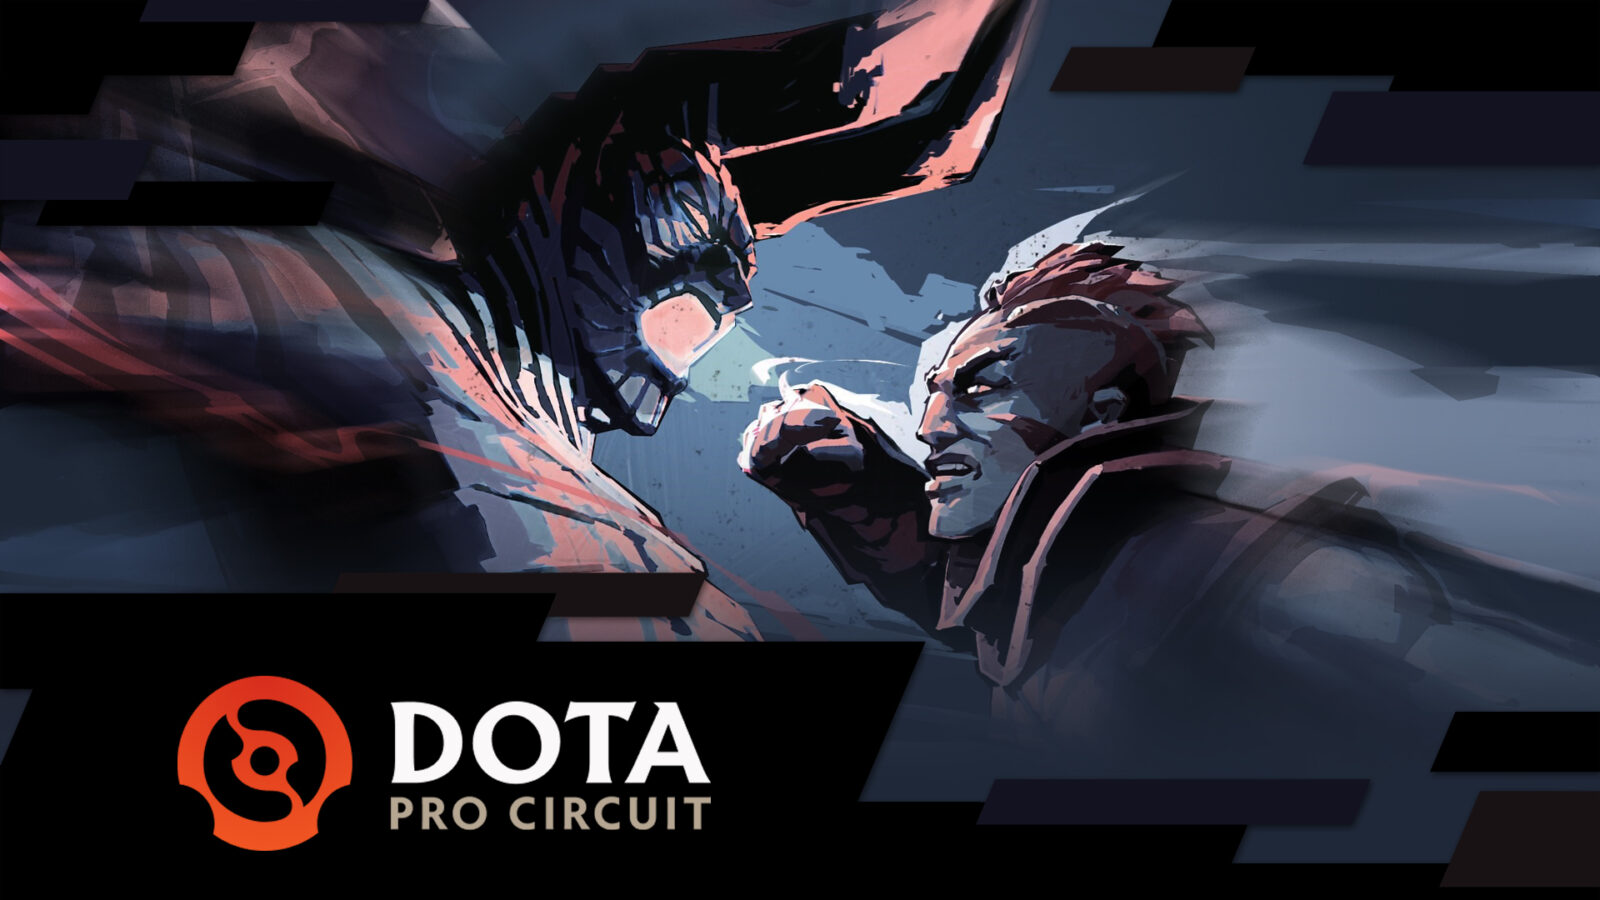 Previewing Upcoming Dota 2 Matches: March 3-7